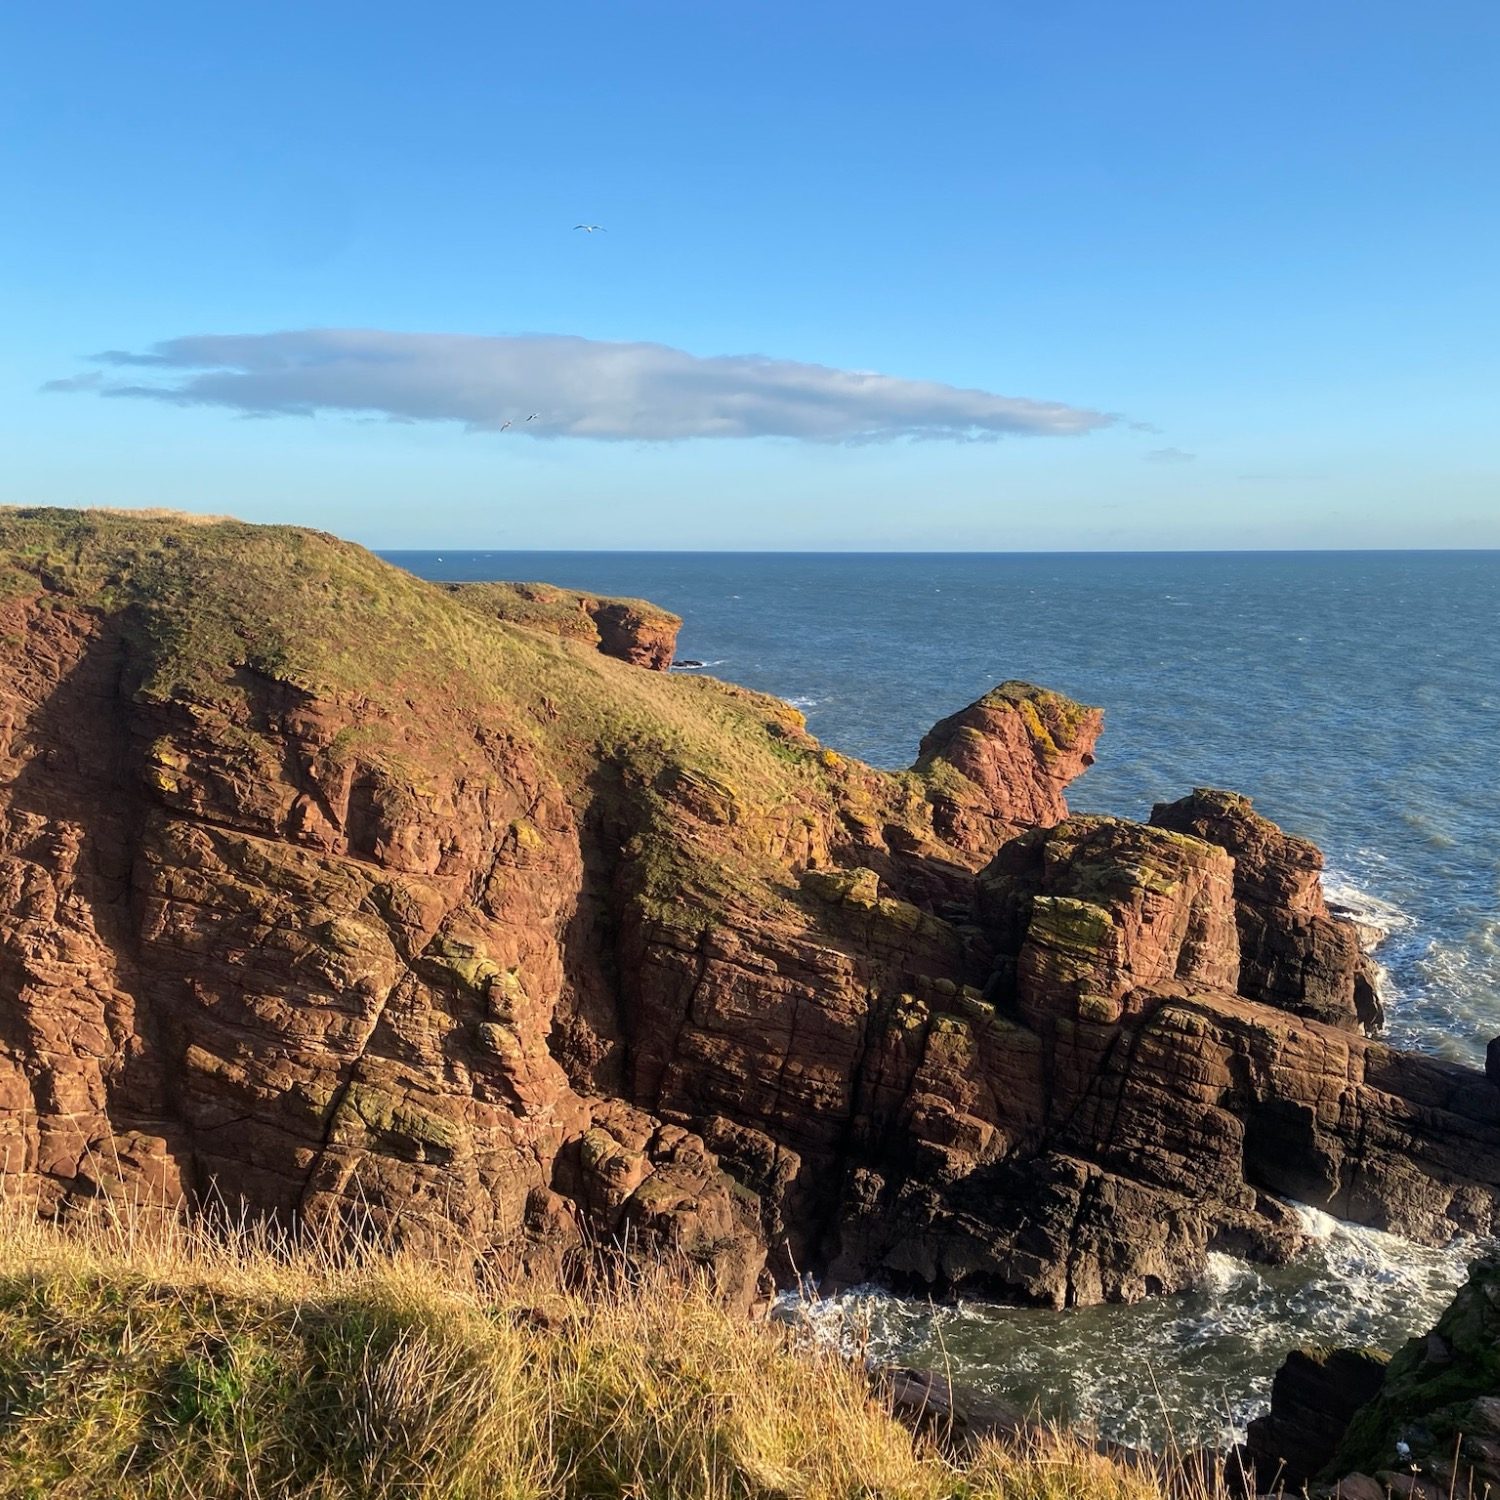 Breathtaking scenery along the Arbroath cliffs.  Cliffs and seas crashing with stunning rock formations.